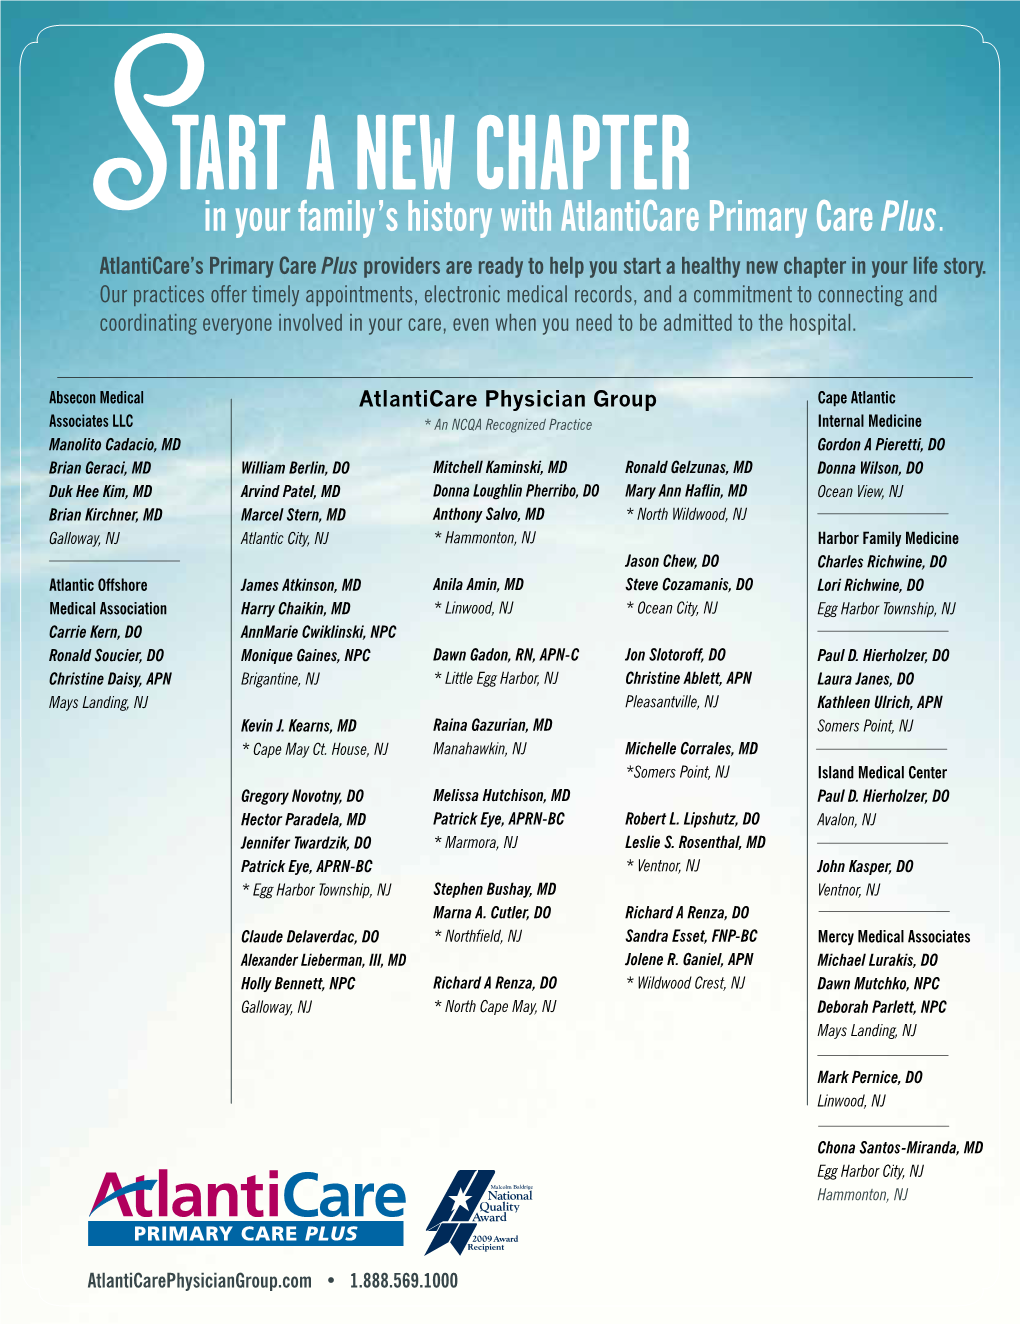 In Your Family's History with Atlanticare Primary Care Plus